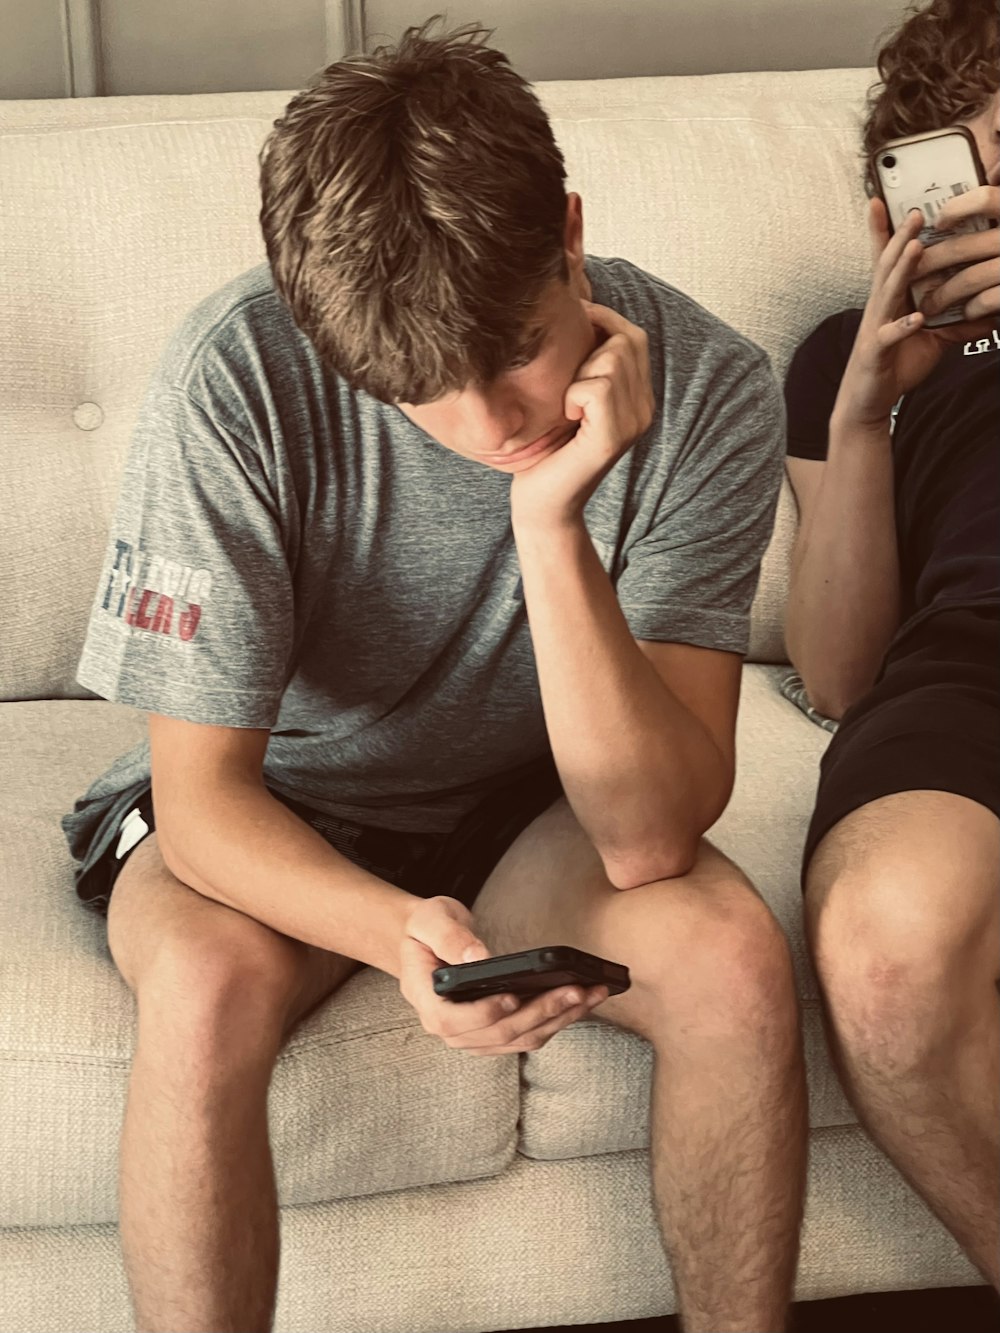 a man sitting on a couch next to another man holding a cell phone